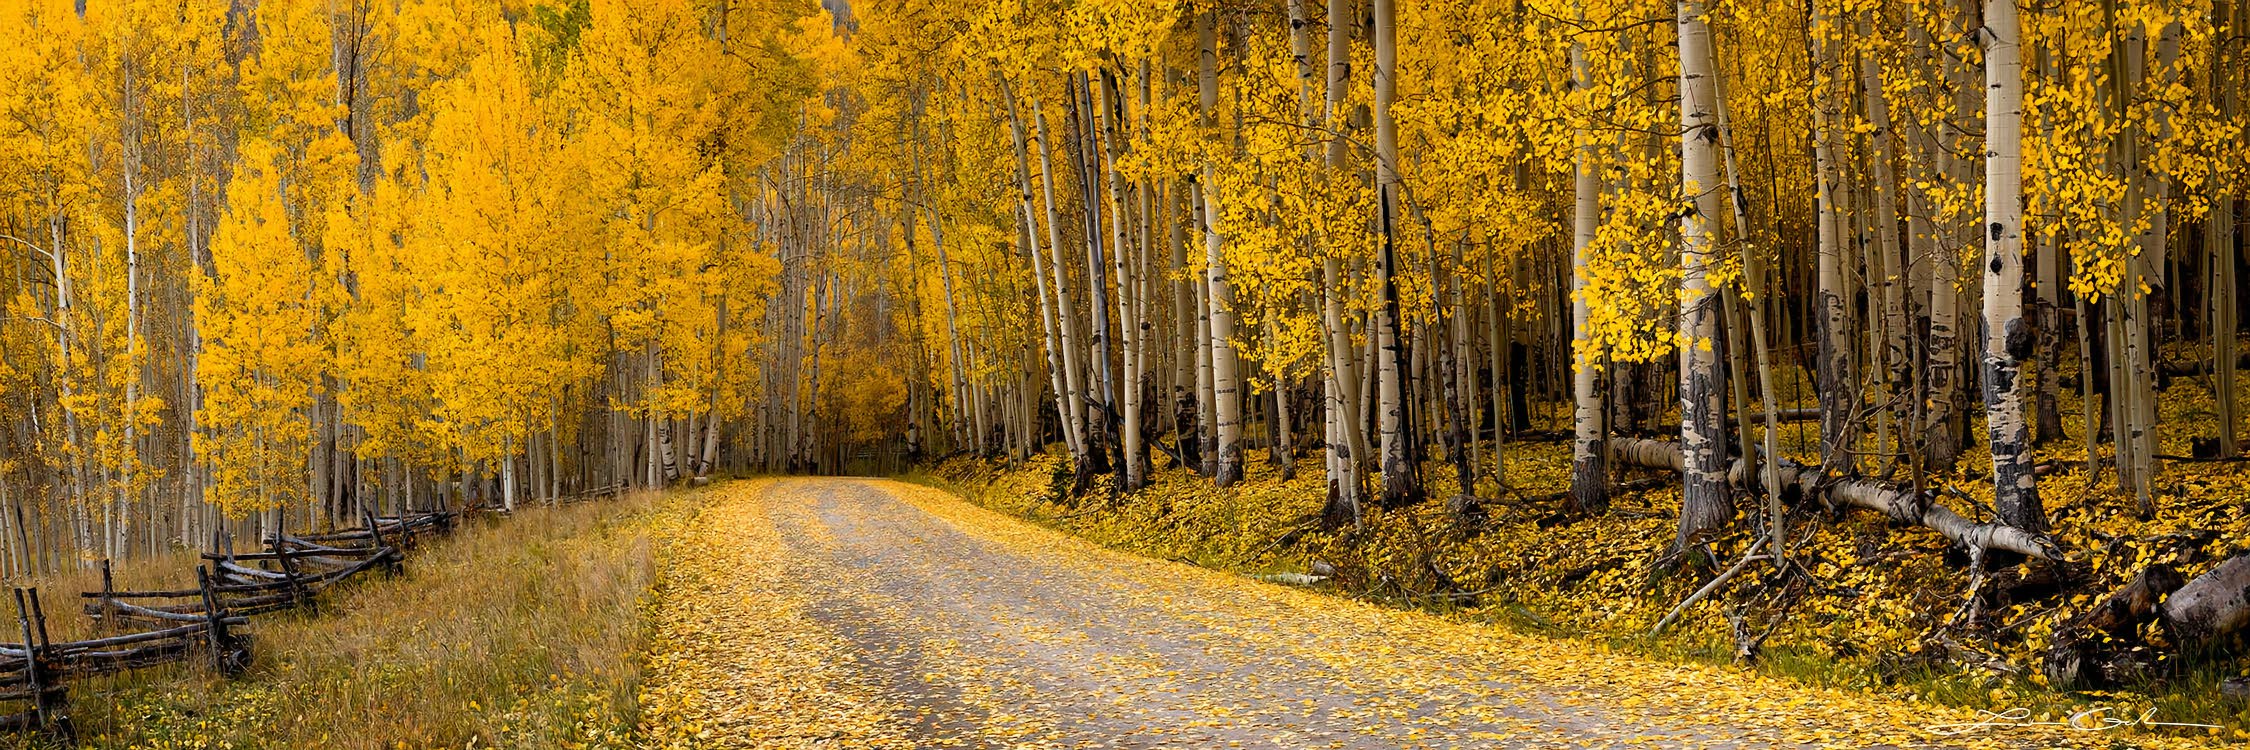 A peaceful country road covered with golden leaves and surrounded by yellow aspens